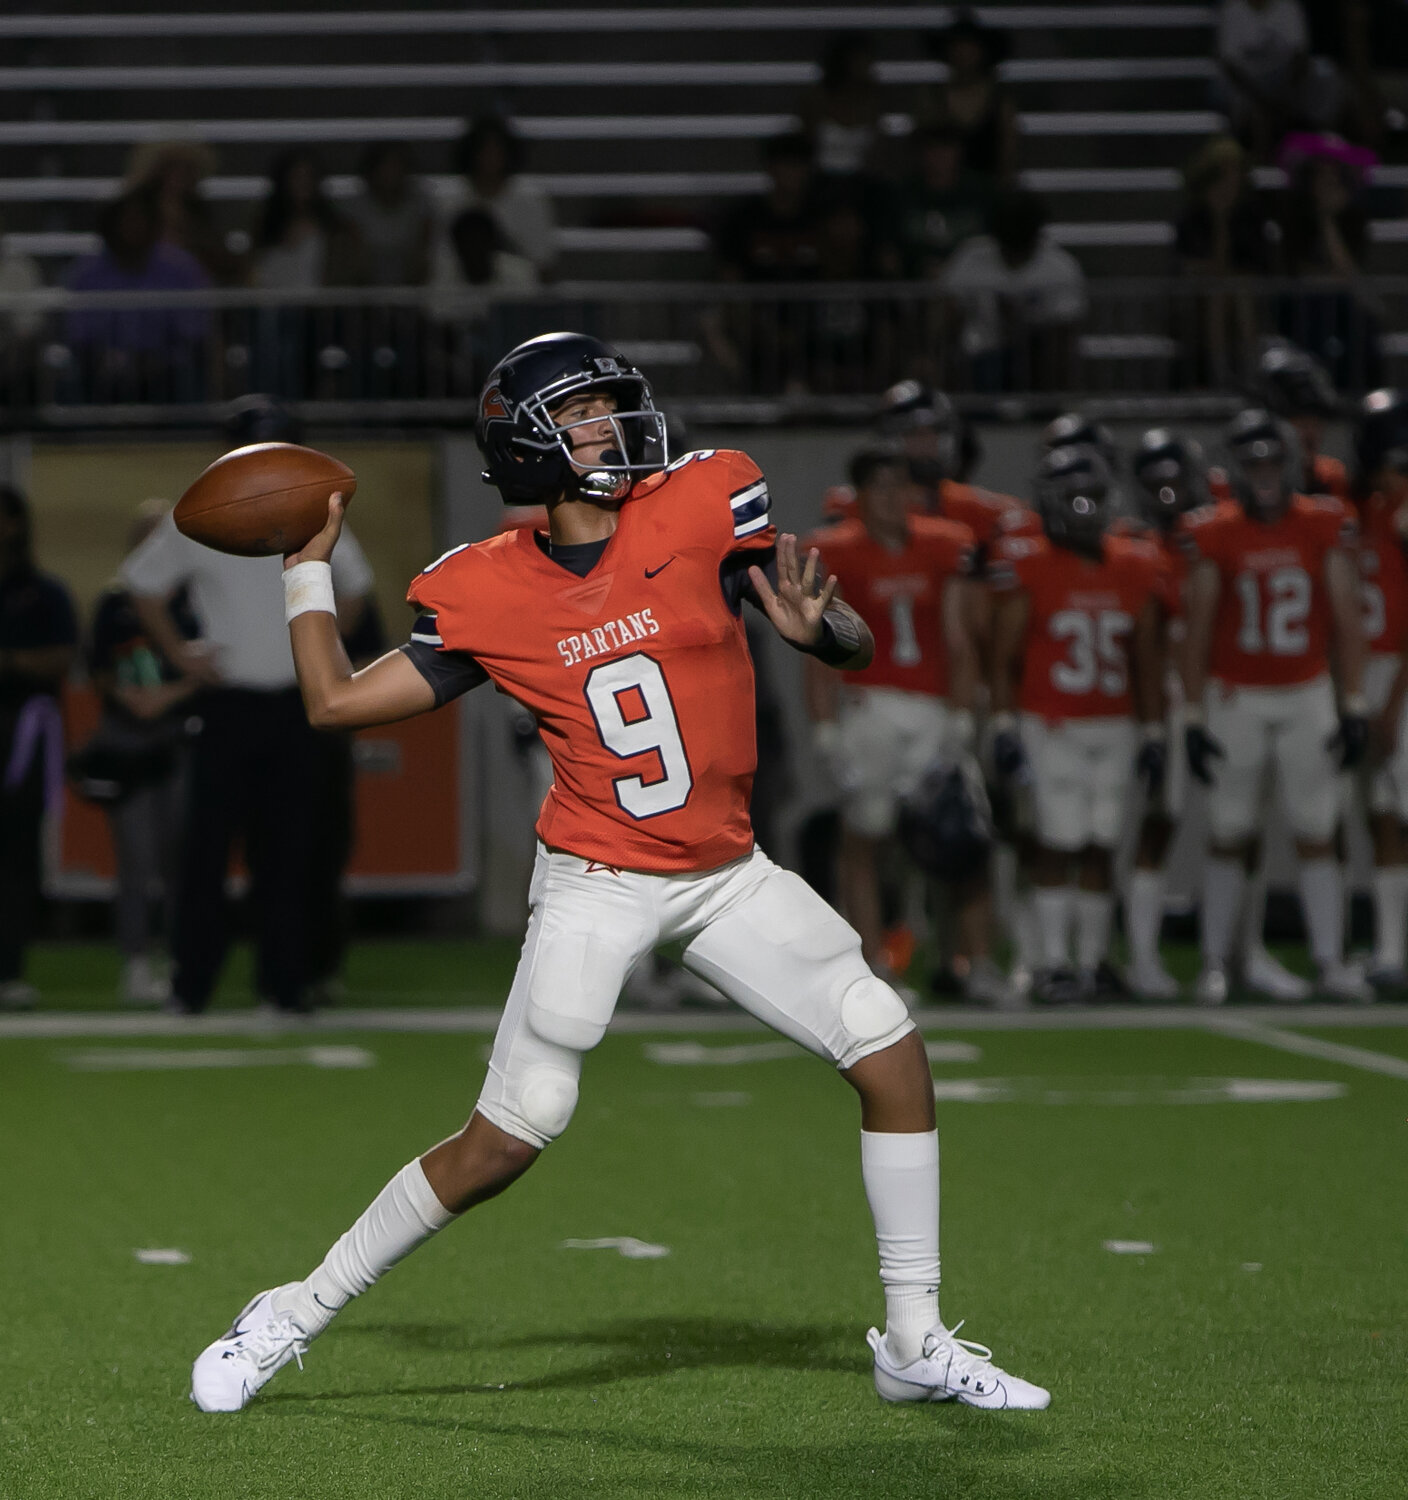 Shaan Patel throws a pass during Thursday's game between Seven Lakes and Memorial at Legacy Stadium.